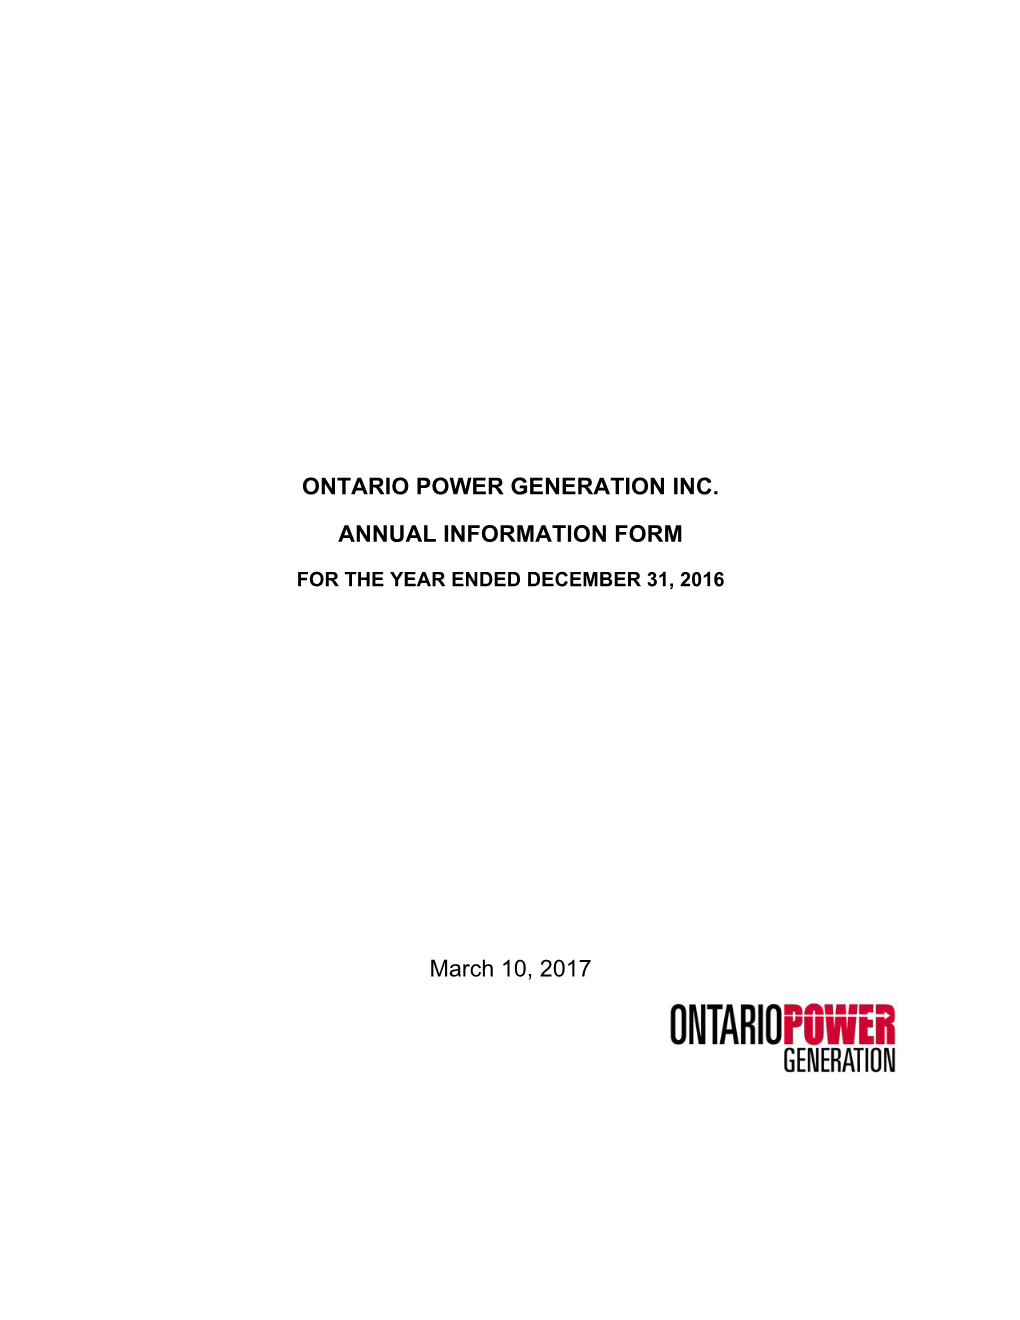 ONTARIO POWER GENERATION INC. ANNUAL INFORMATION FORM March 10, 2017